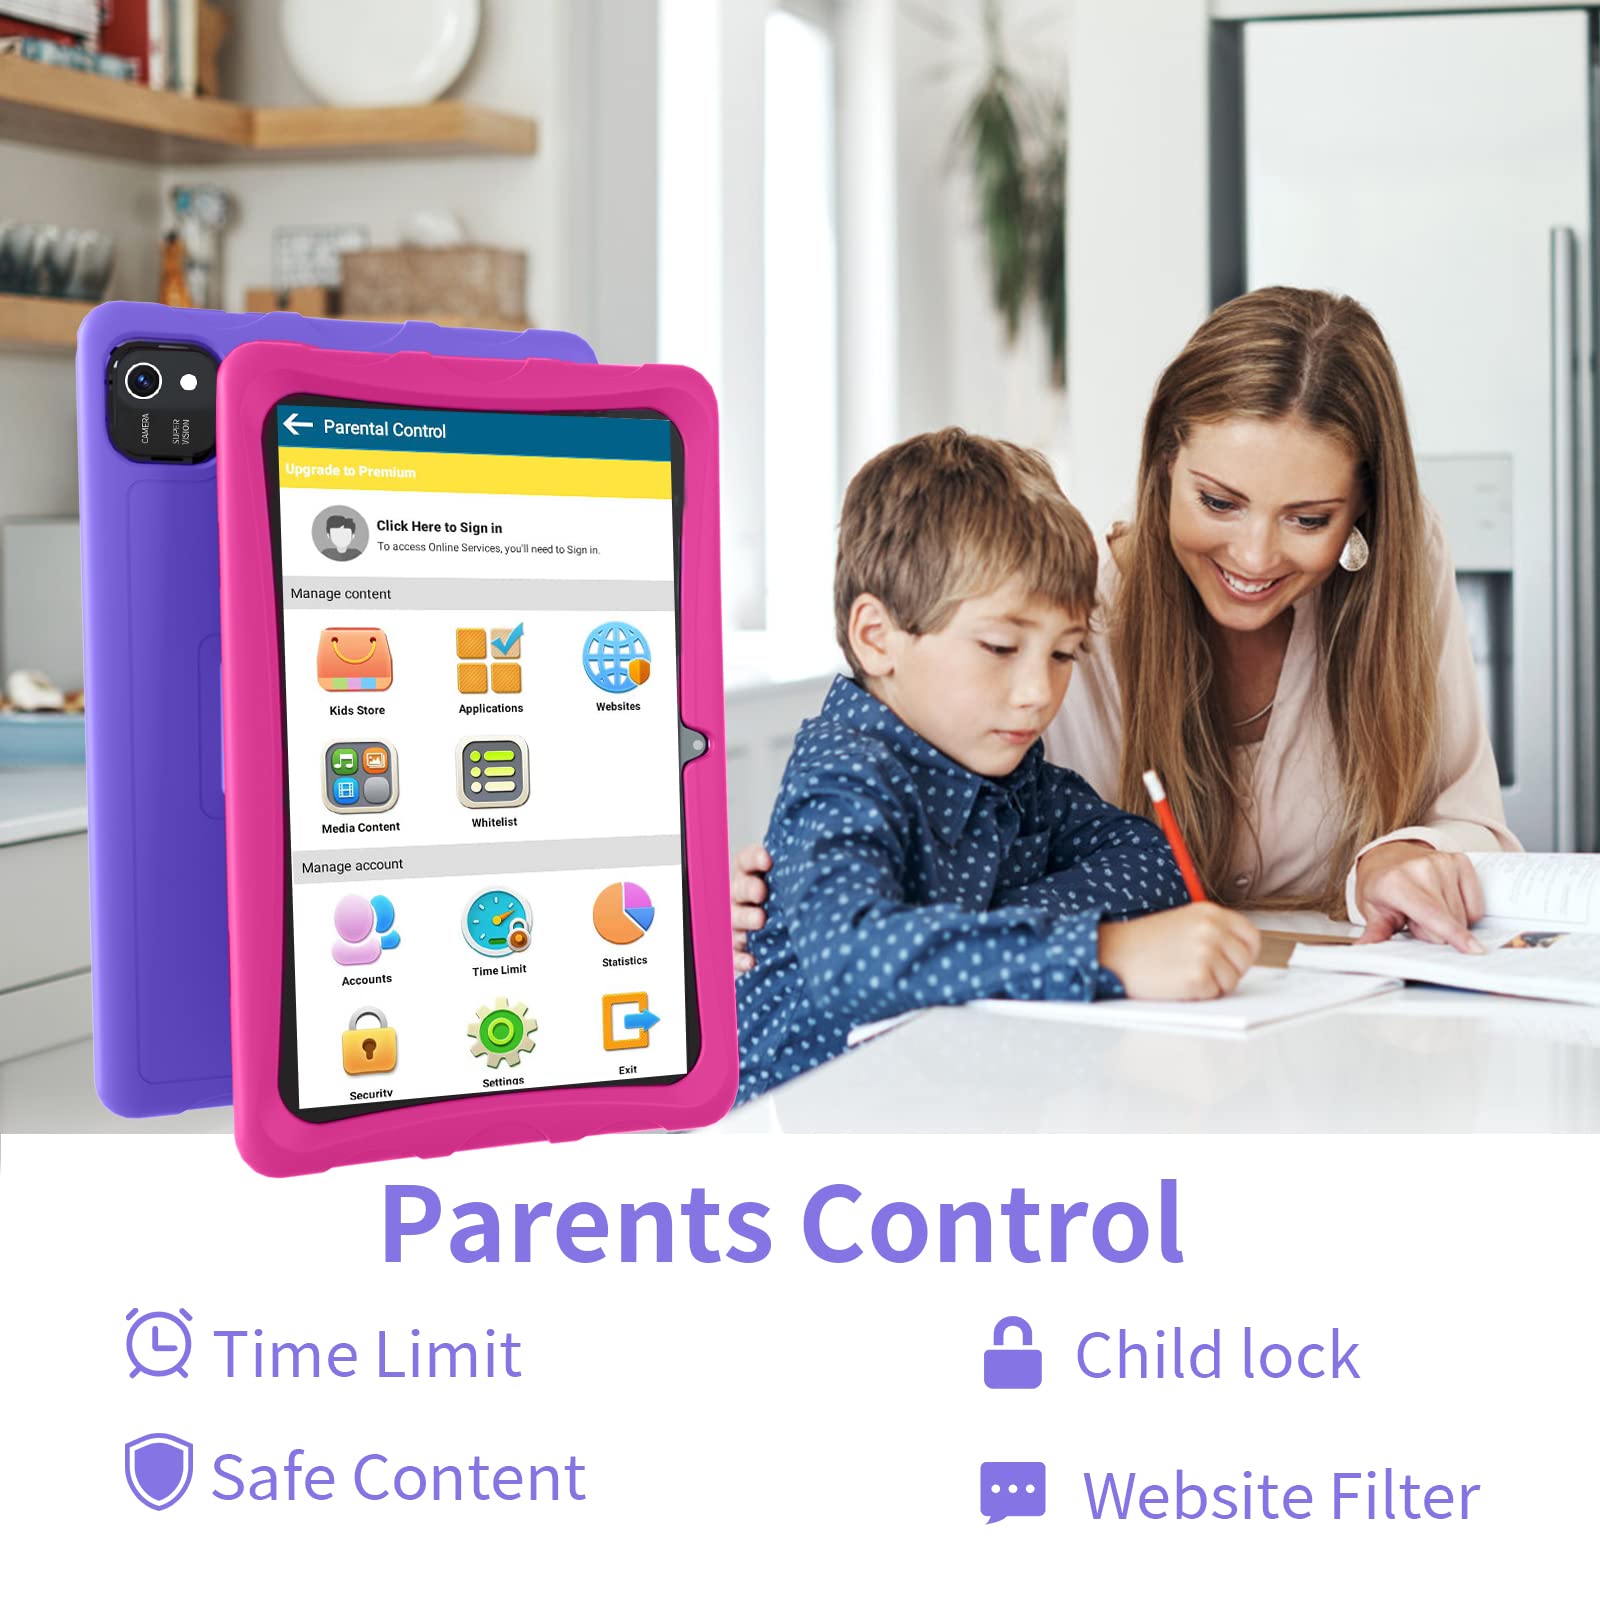 Android 13 Tablet, 10 inch Tablet for Kids with Case, 4GB RAM 64GB ROM 512GB Expand, Quad-Core Processor, 1280x800 IPS Touch Screen, GPS, WiFi, Dual Camera, Bluetooth, 6000mAh (Purple)